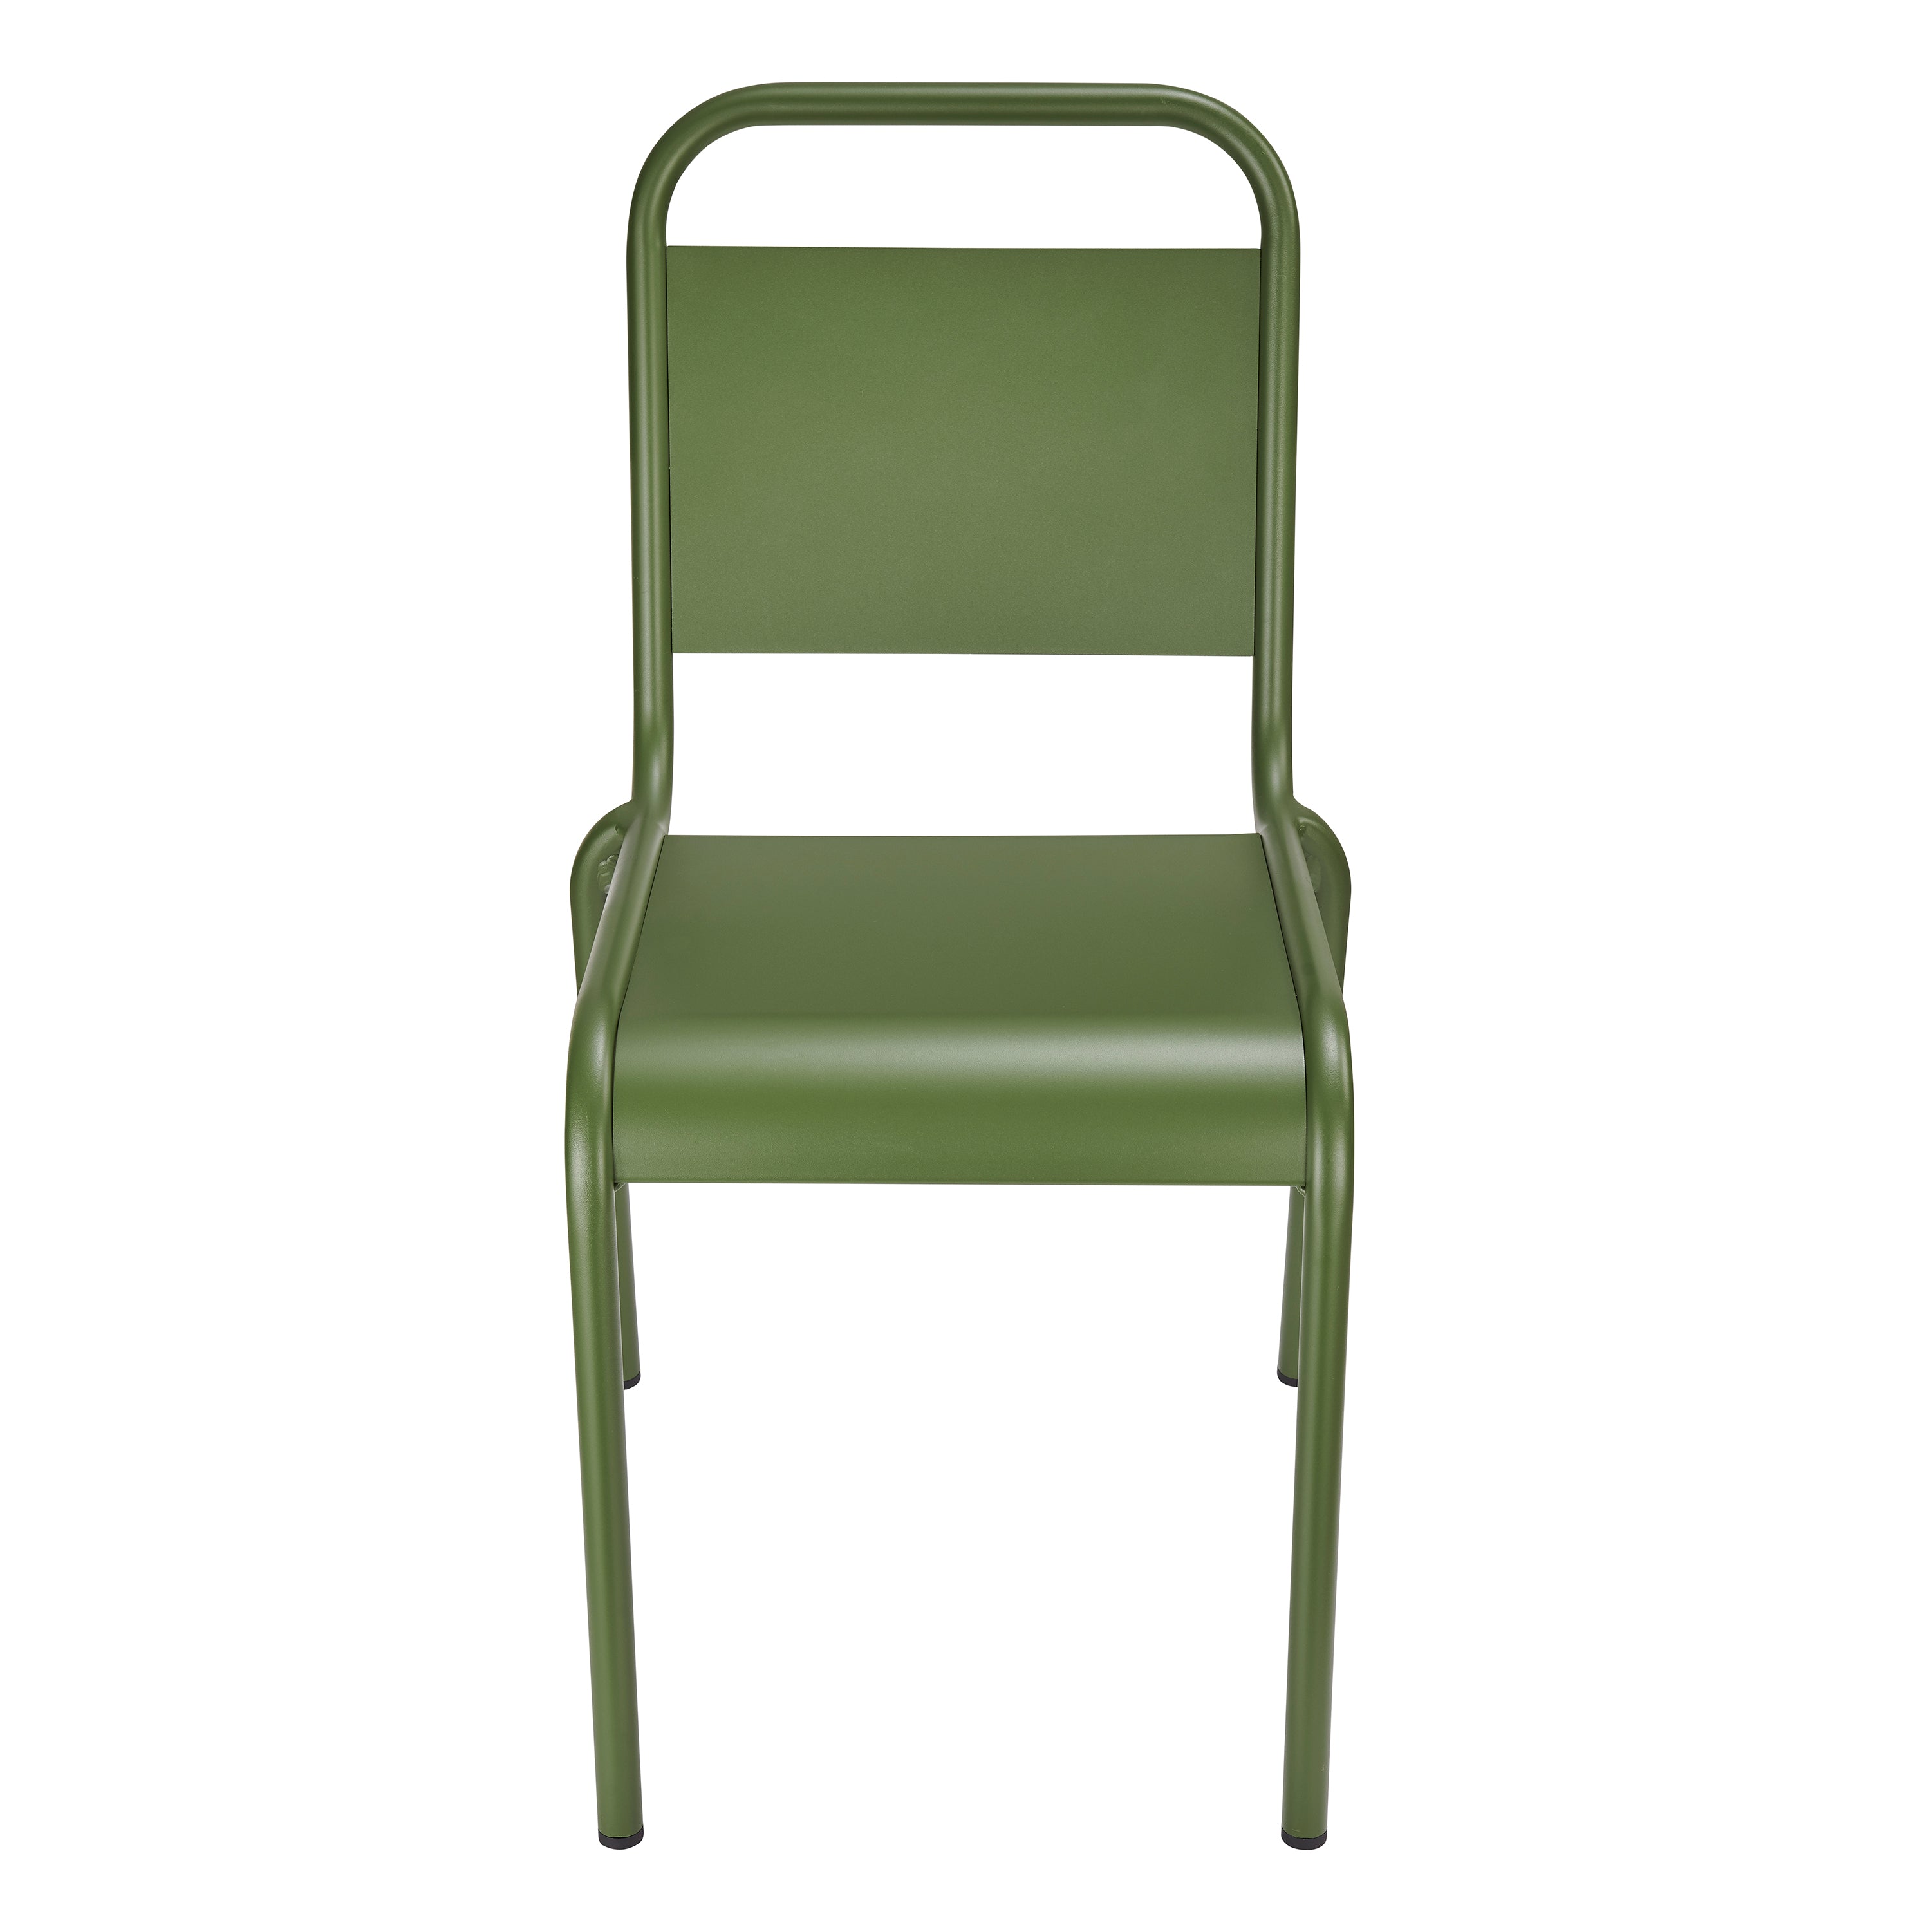 Euro Style Dining Chairs - Otis Outdoor Side Chair in Dark Green - Set of 2